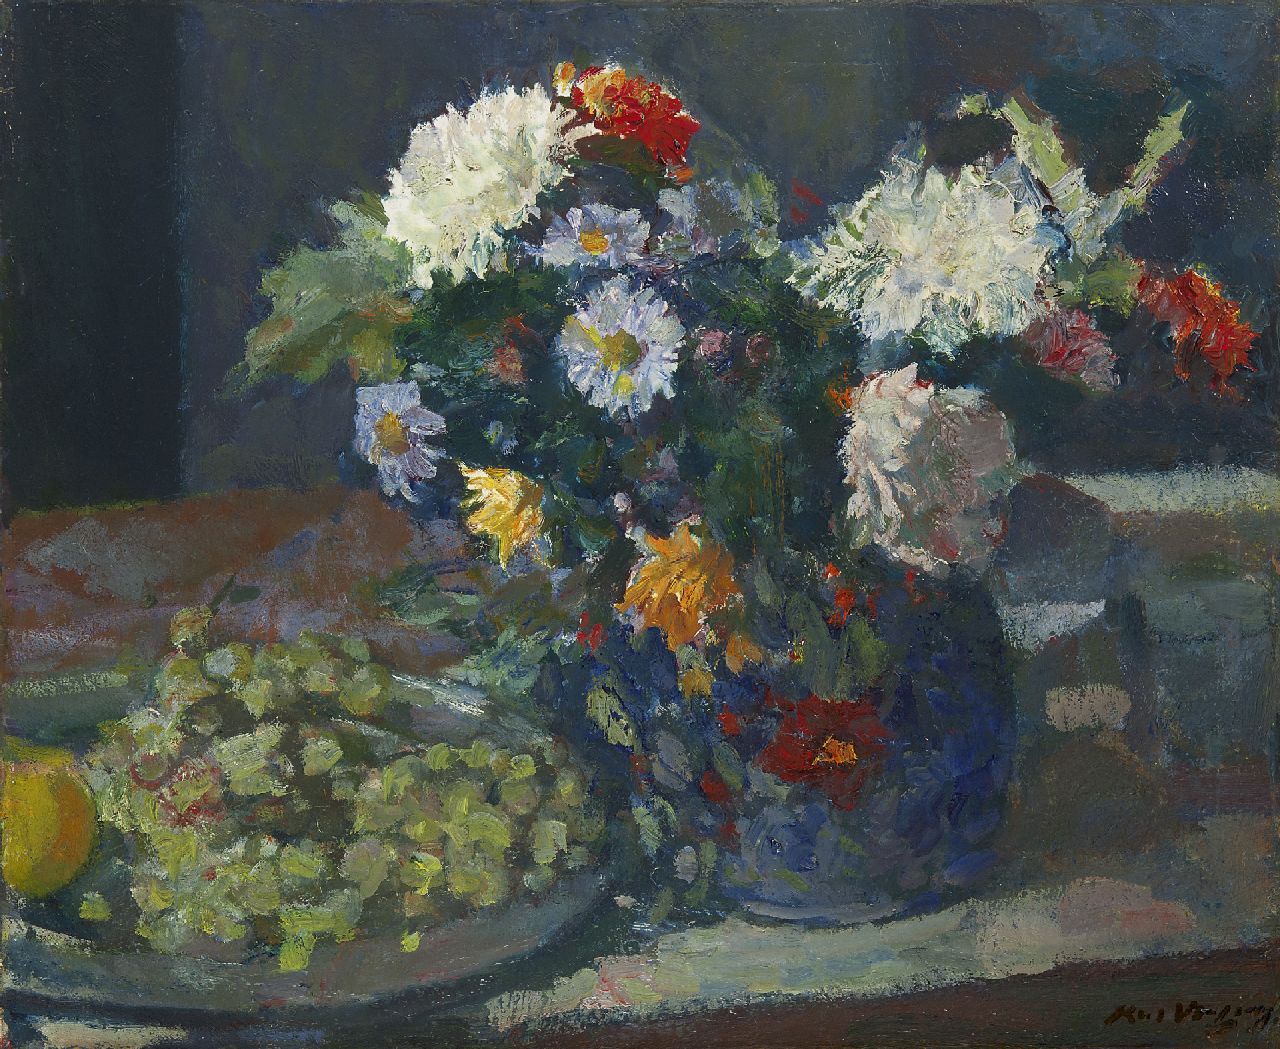 Verwey K.  | Kees Verwey | Paintings offered for sale | A still life with autumn flowers, oil on canvas 50.6 x 60.7 cm, signed l.r.